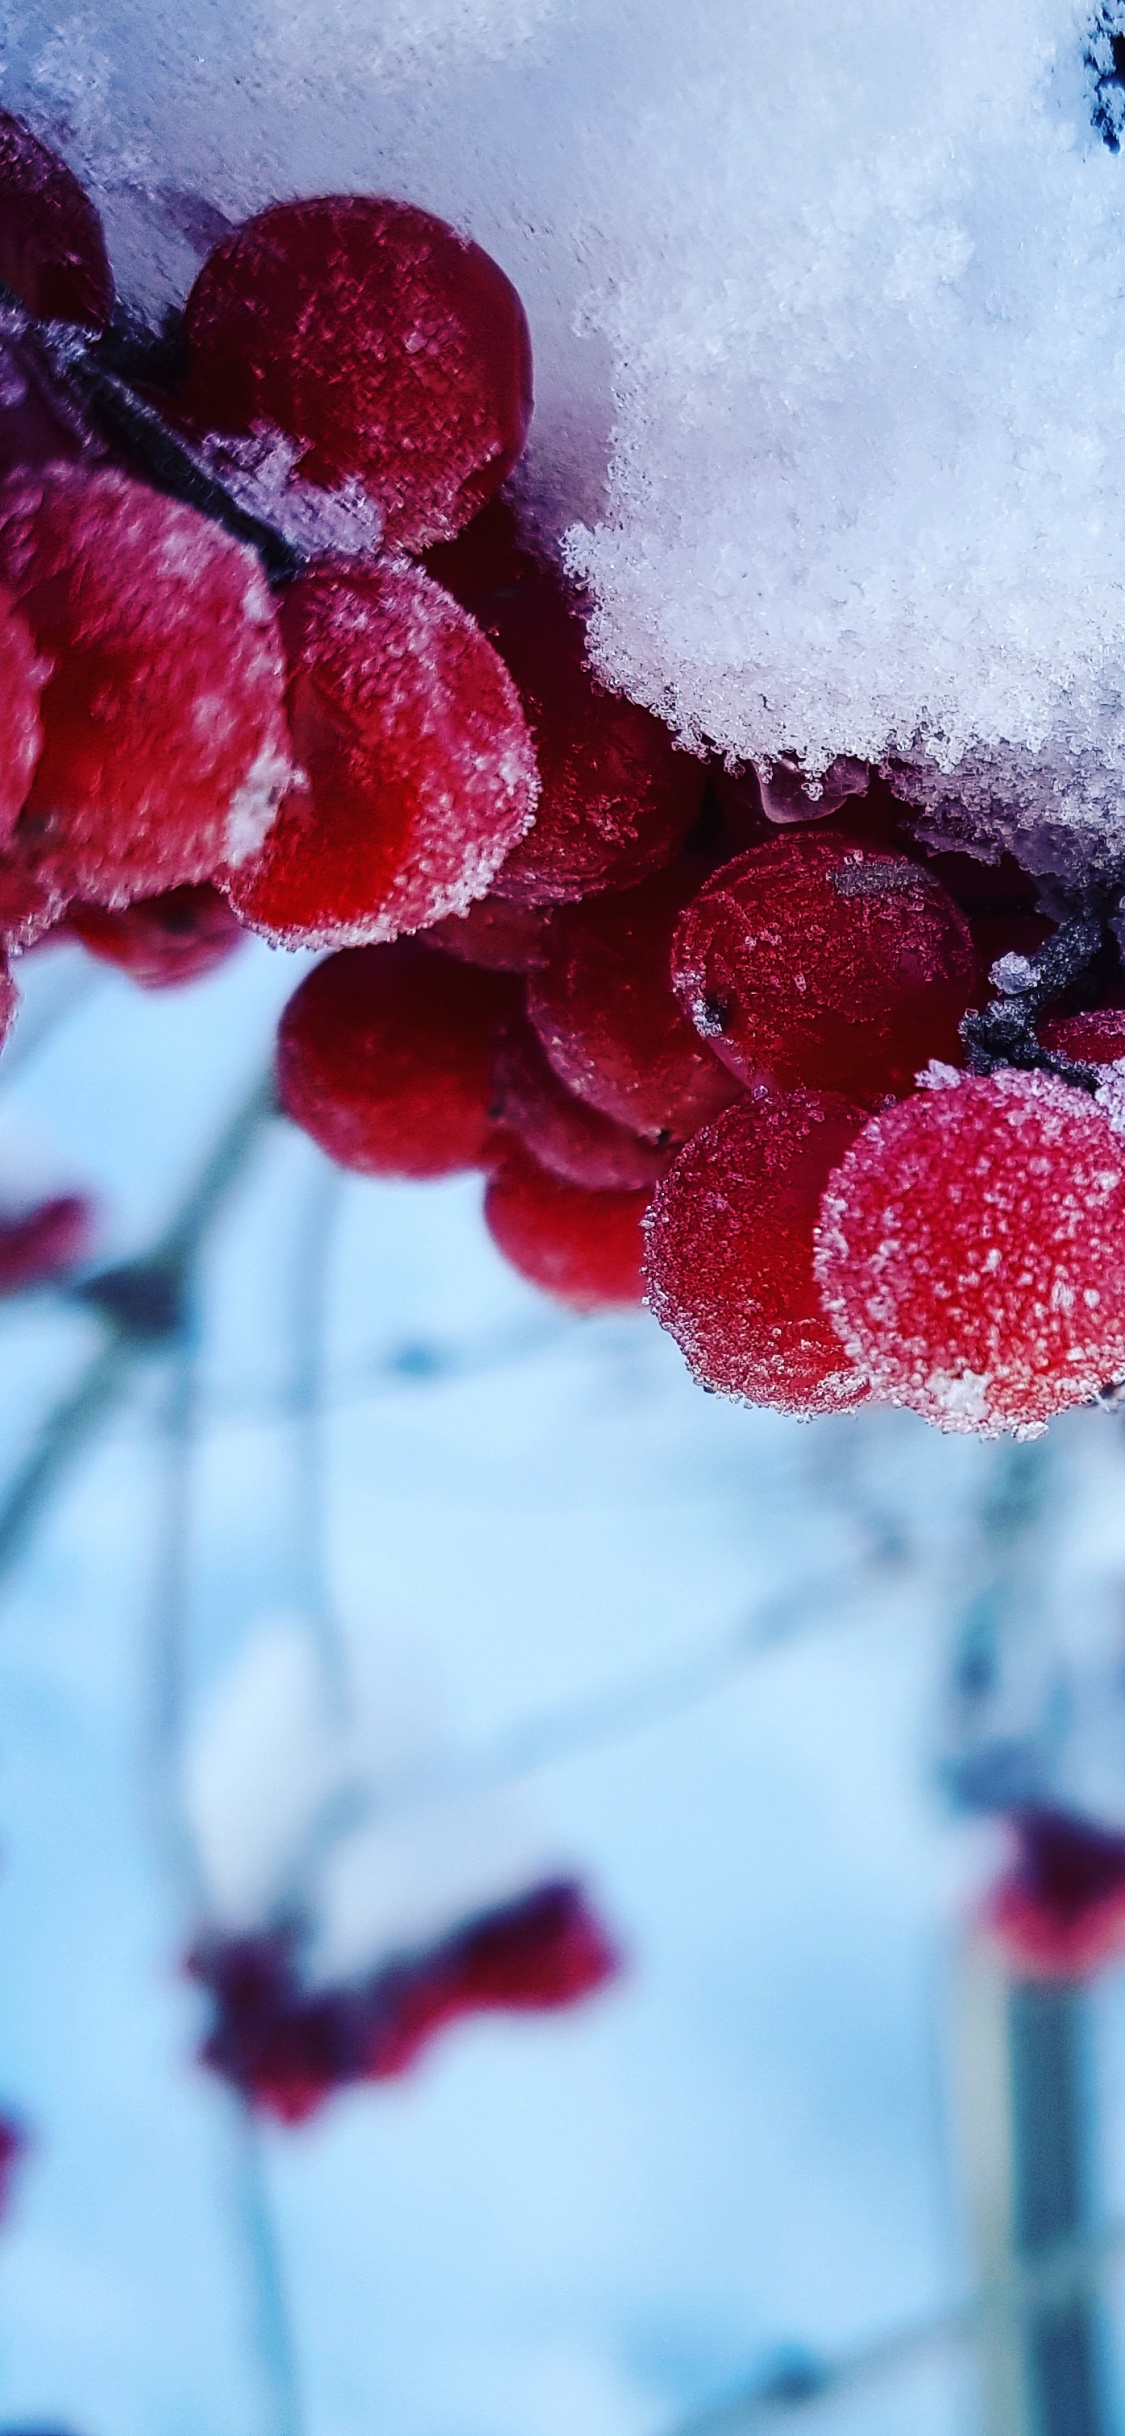 Fruits Ronds Rouges Recouverts de Neige. Wallpaper in 1125x2436 Resolution